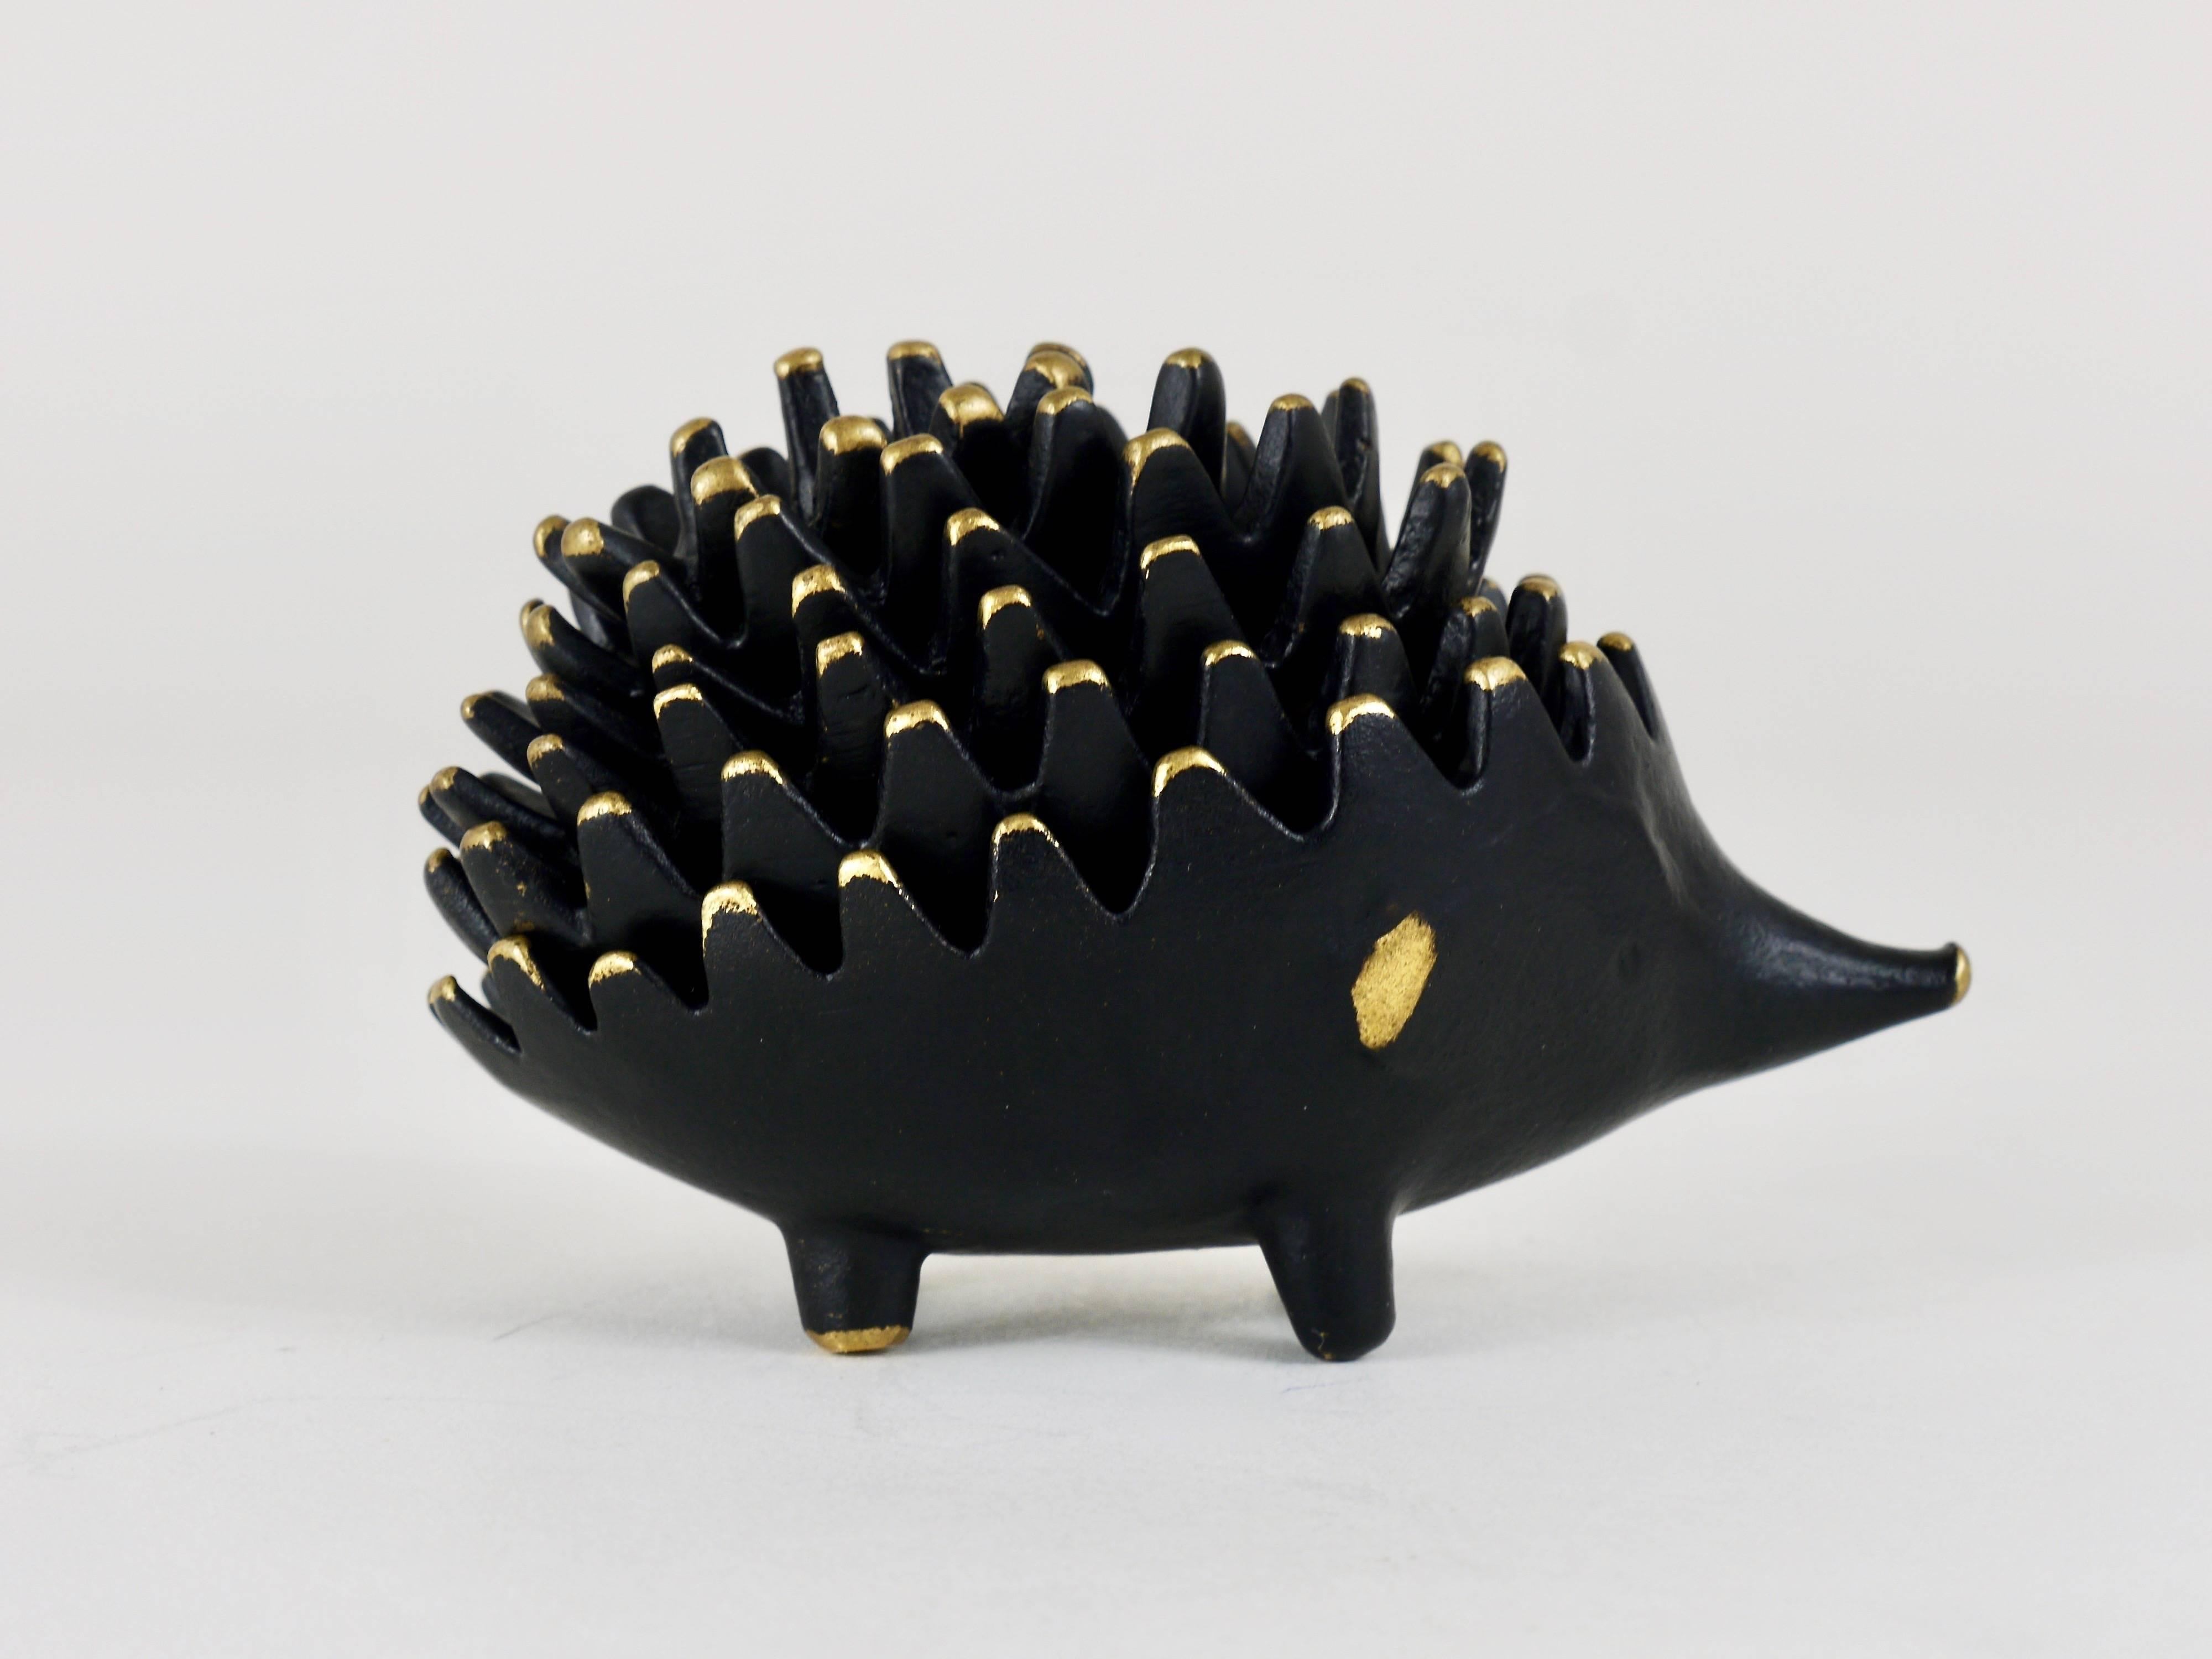 A complete set of six vintage stackable midcentury hedgehog ashtrays. A very humorous design by Walter Bosse, executed by Hertha Baller, Austria in the 1950s. Made of brass, in very good condition.